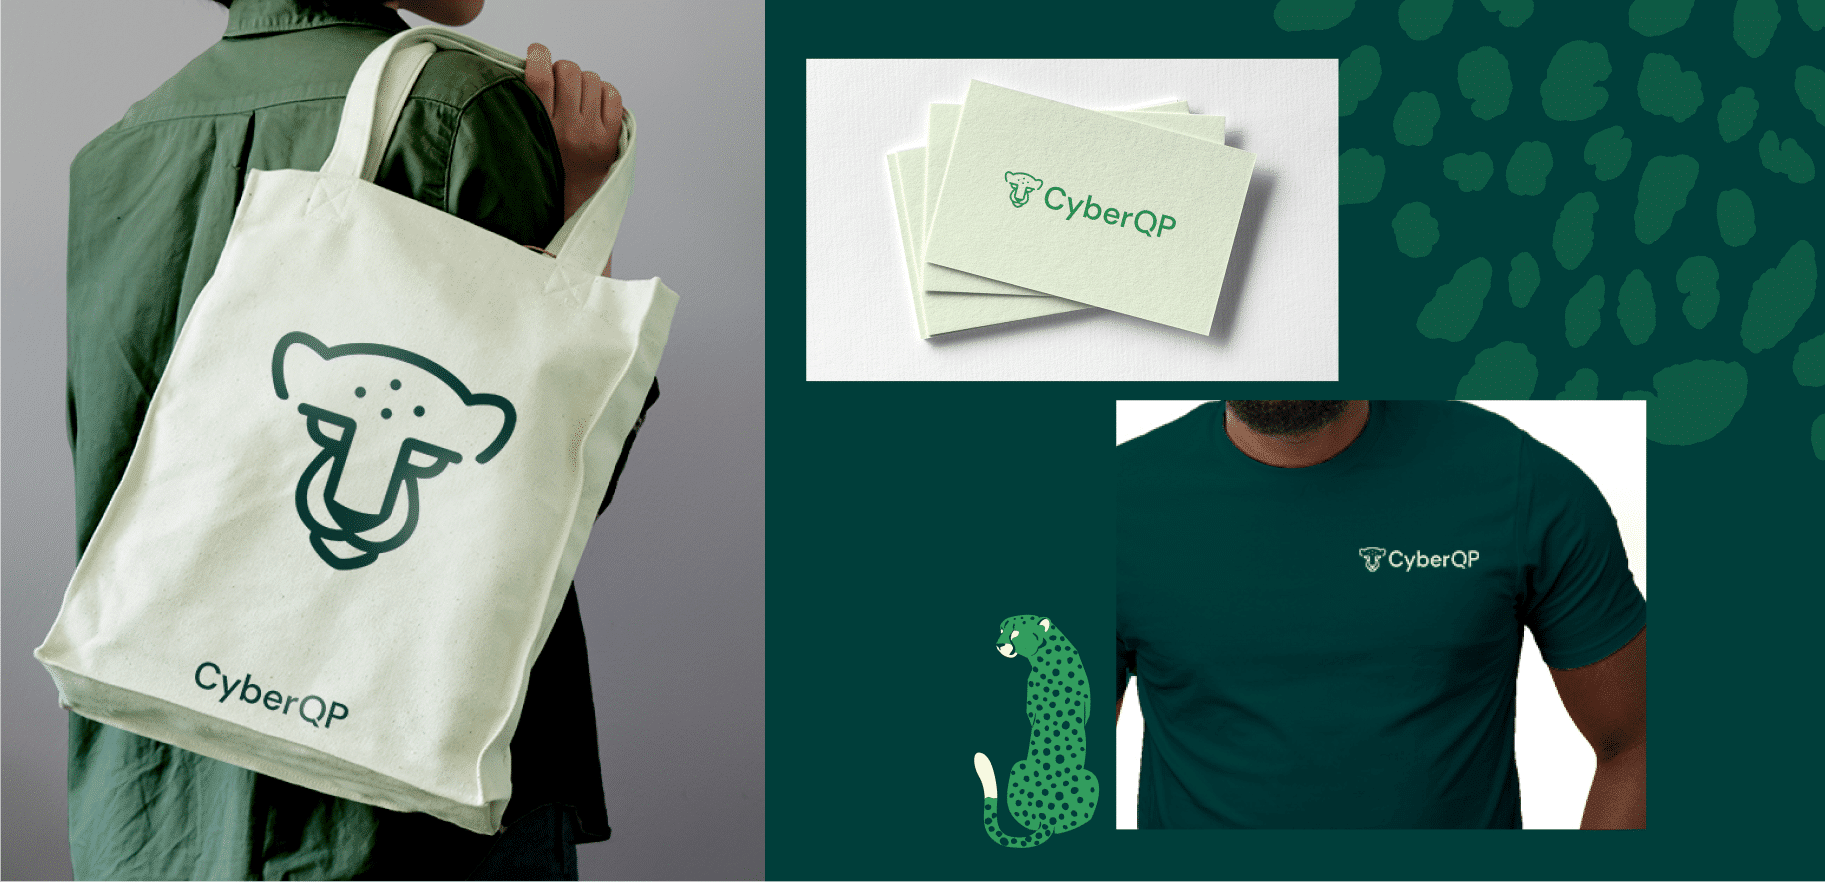 Tote back, business card and detail of a t-shirt with CyberQP branding. Green vector cheetah.